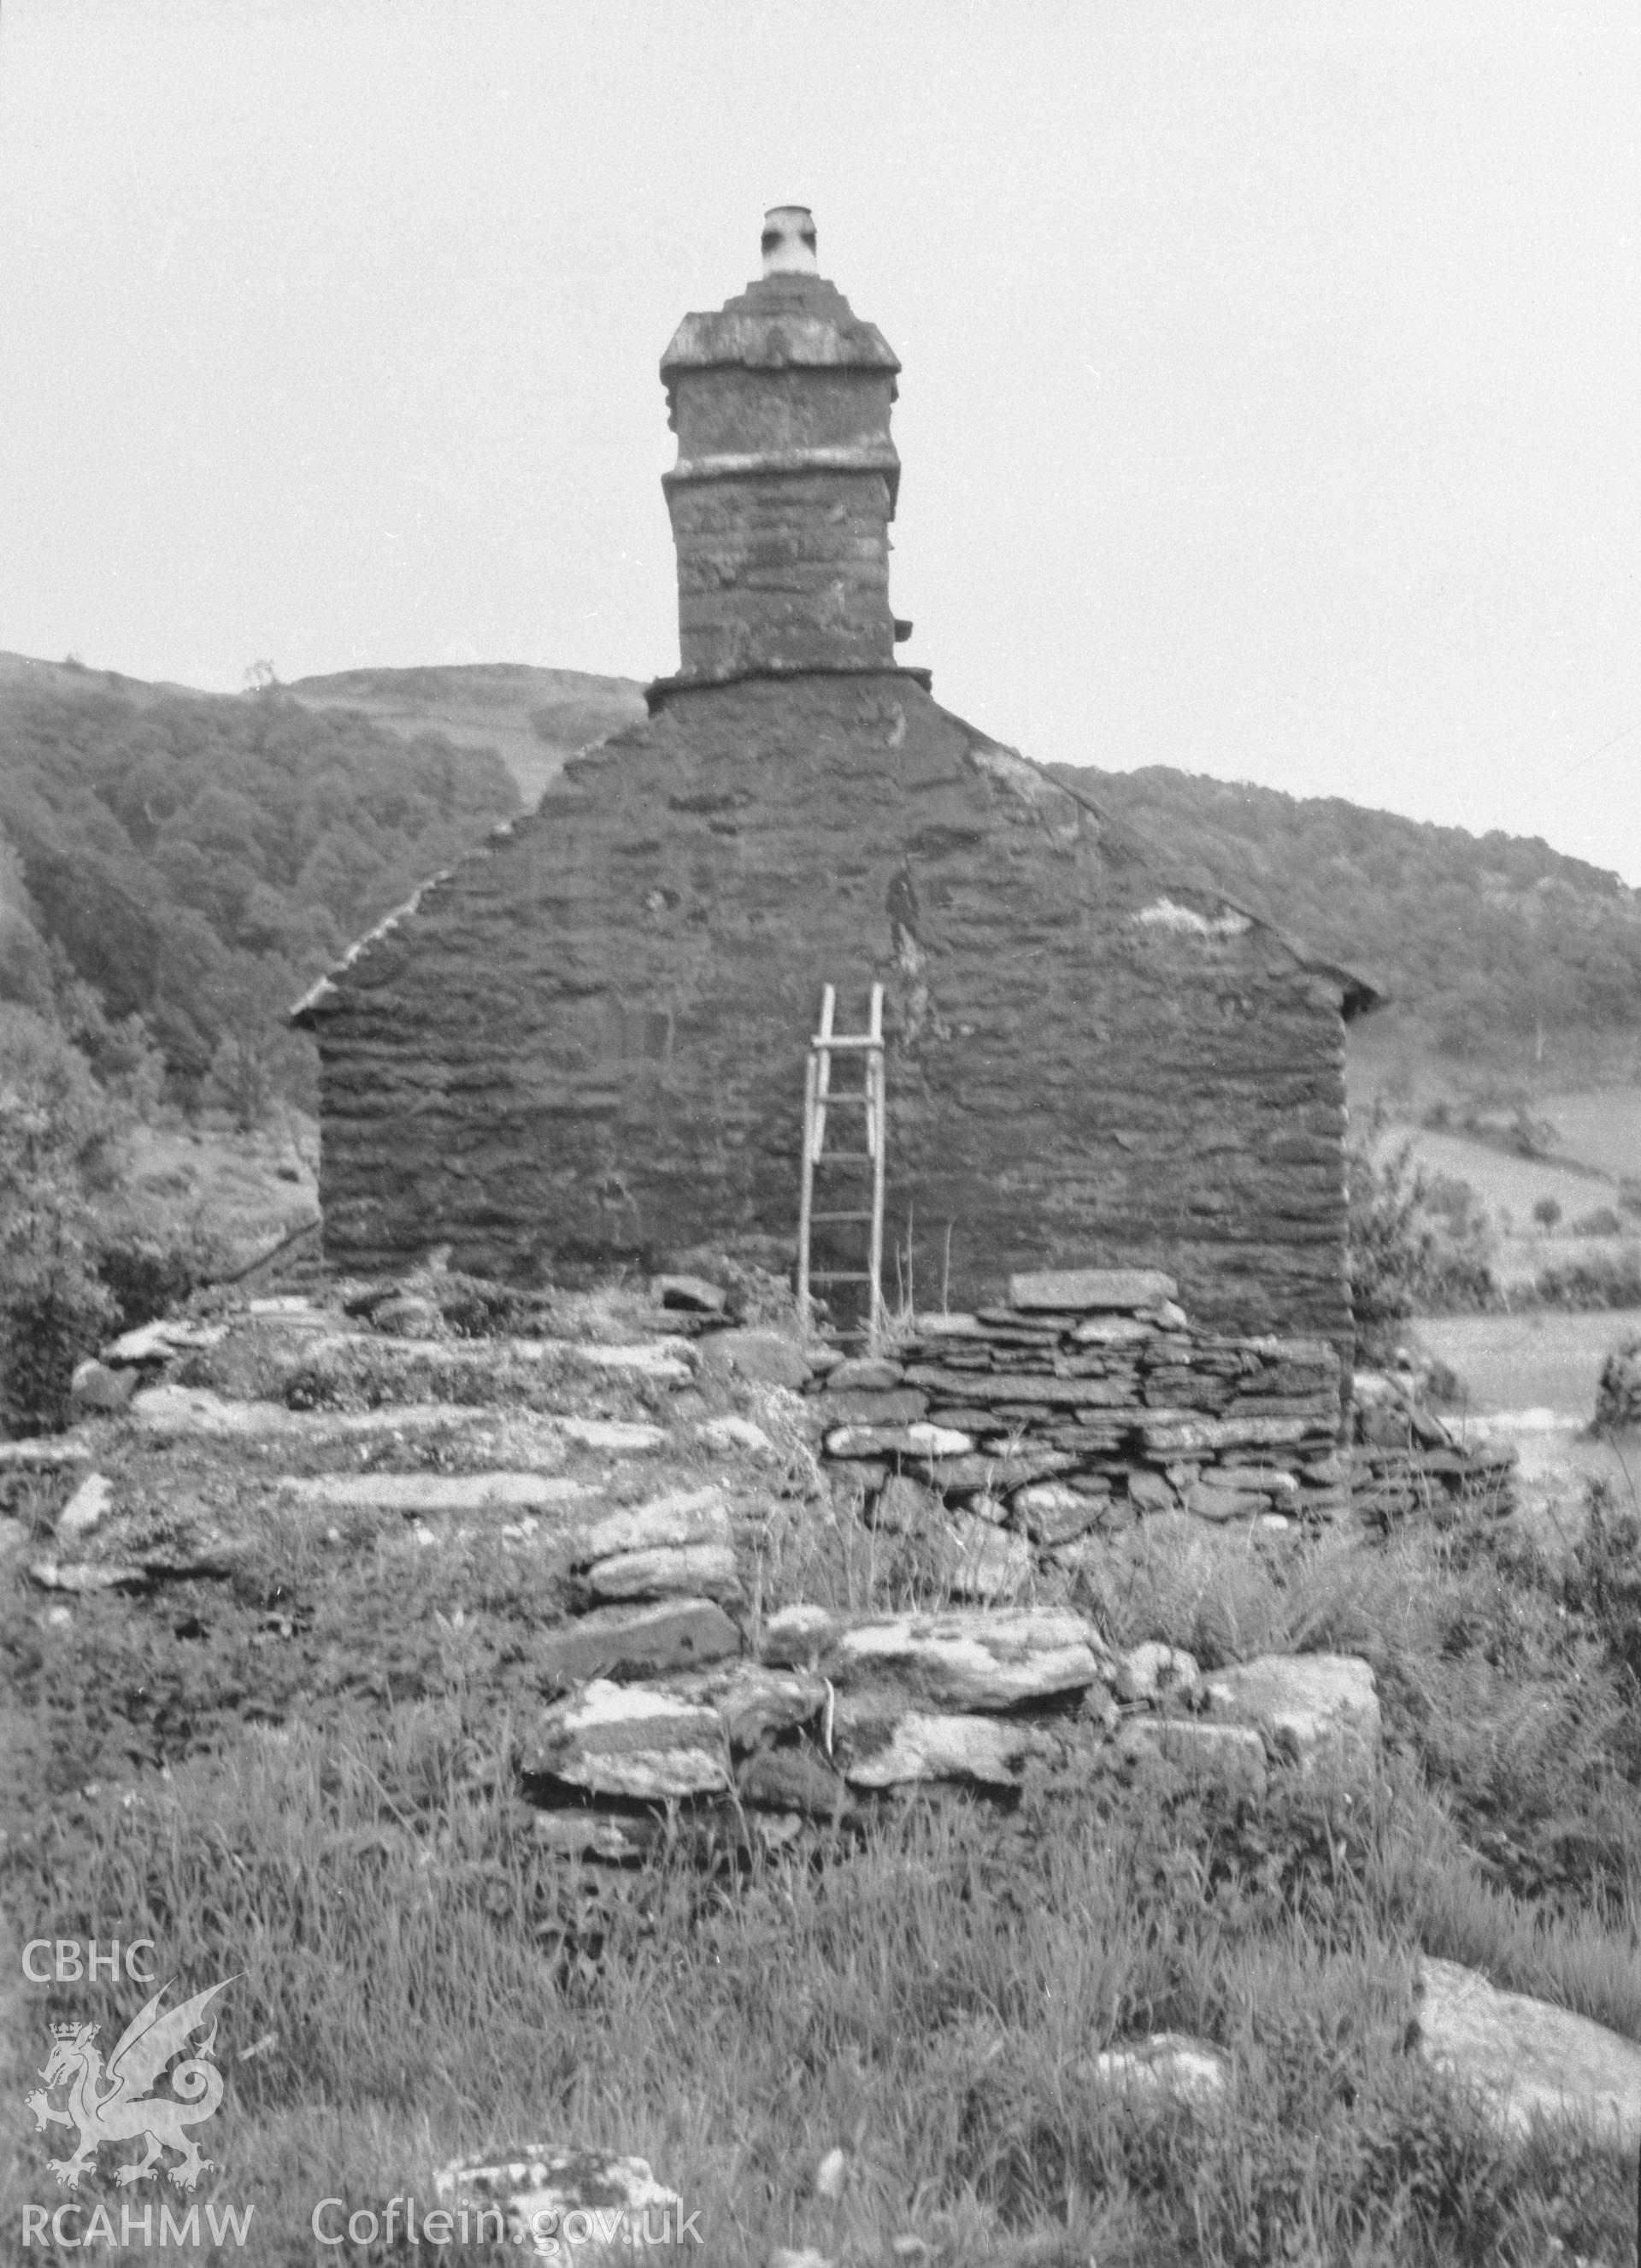 Copy of an early photo showing south gable end